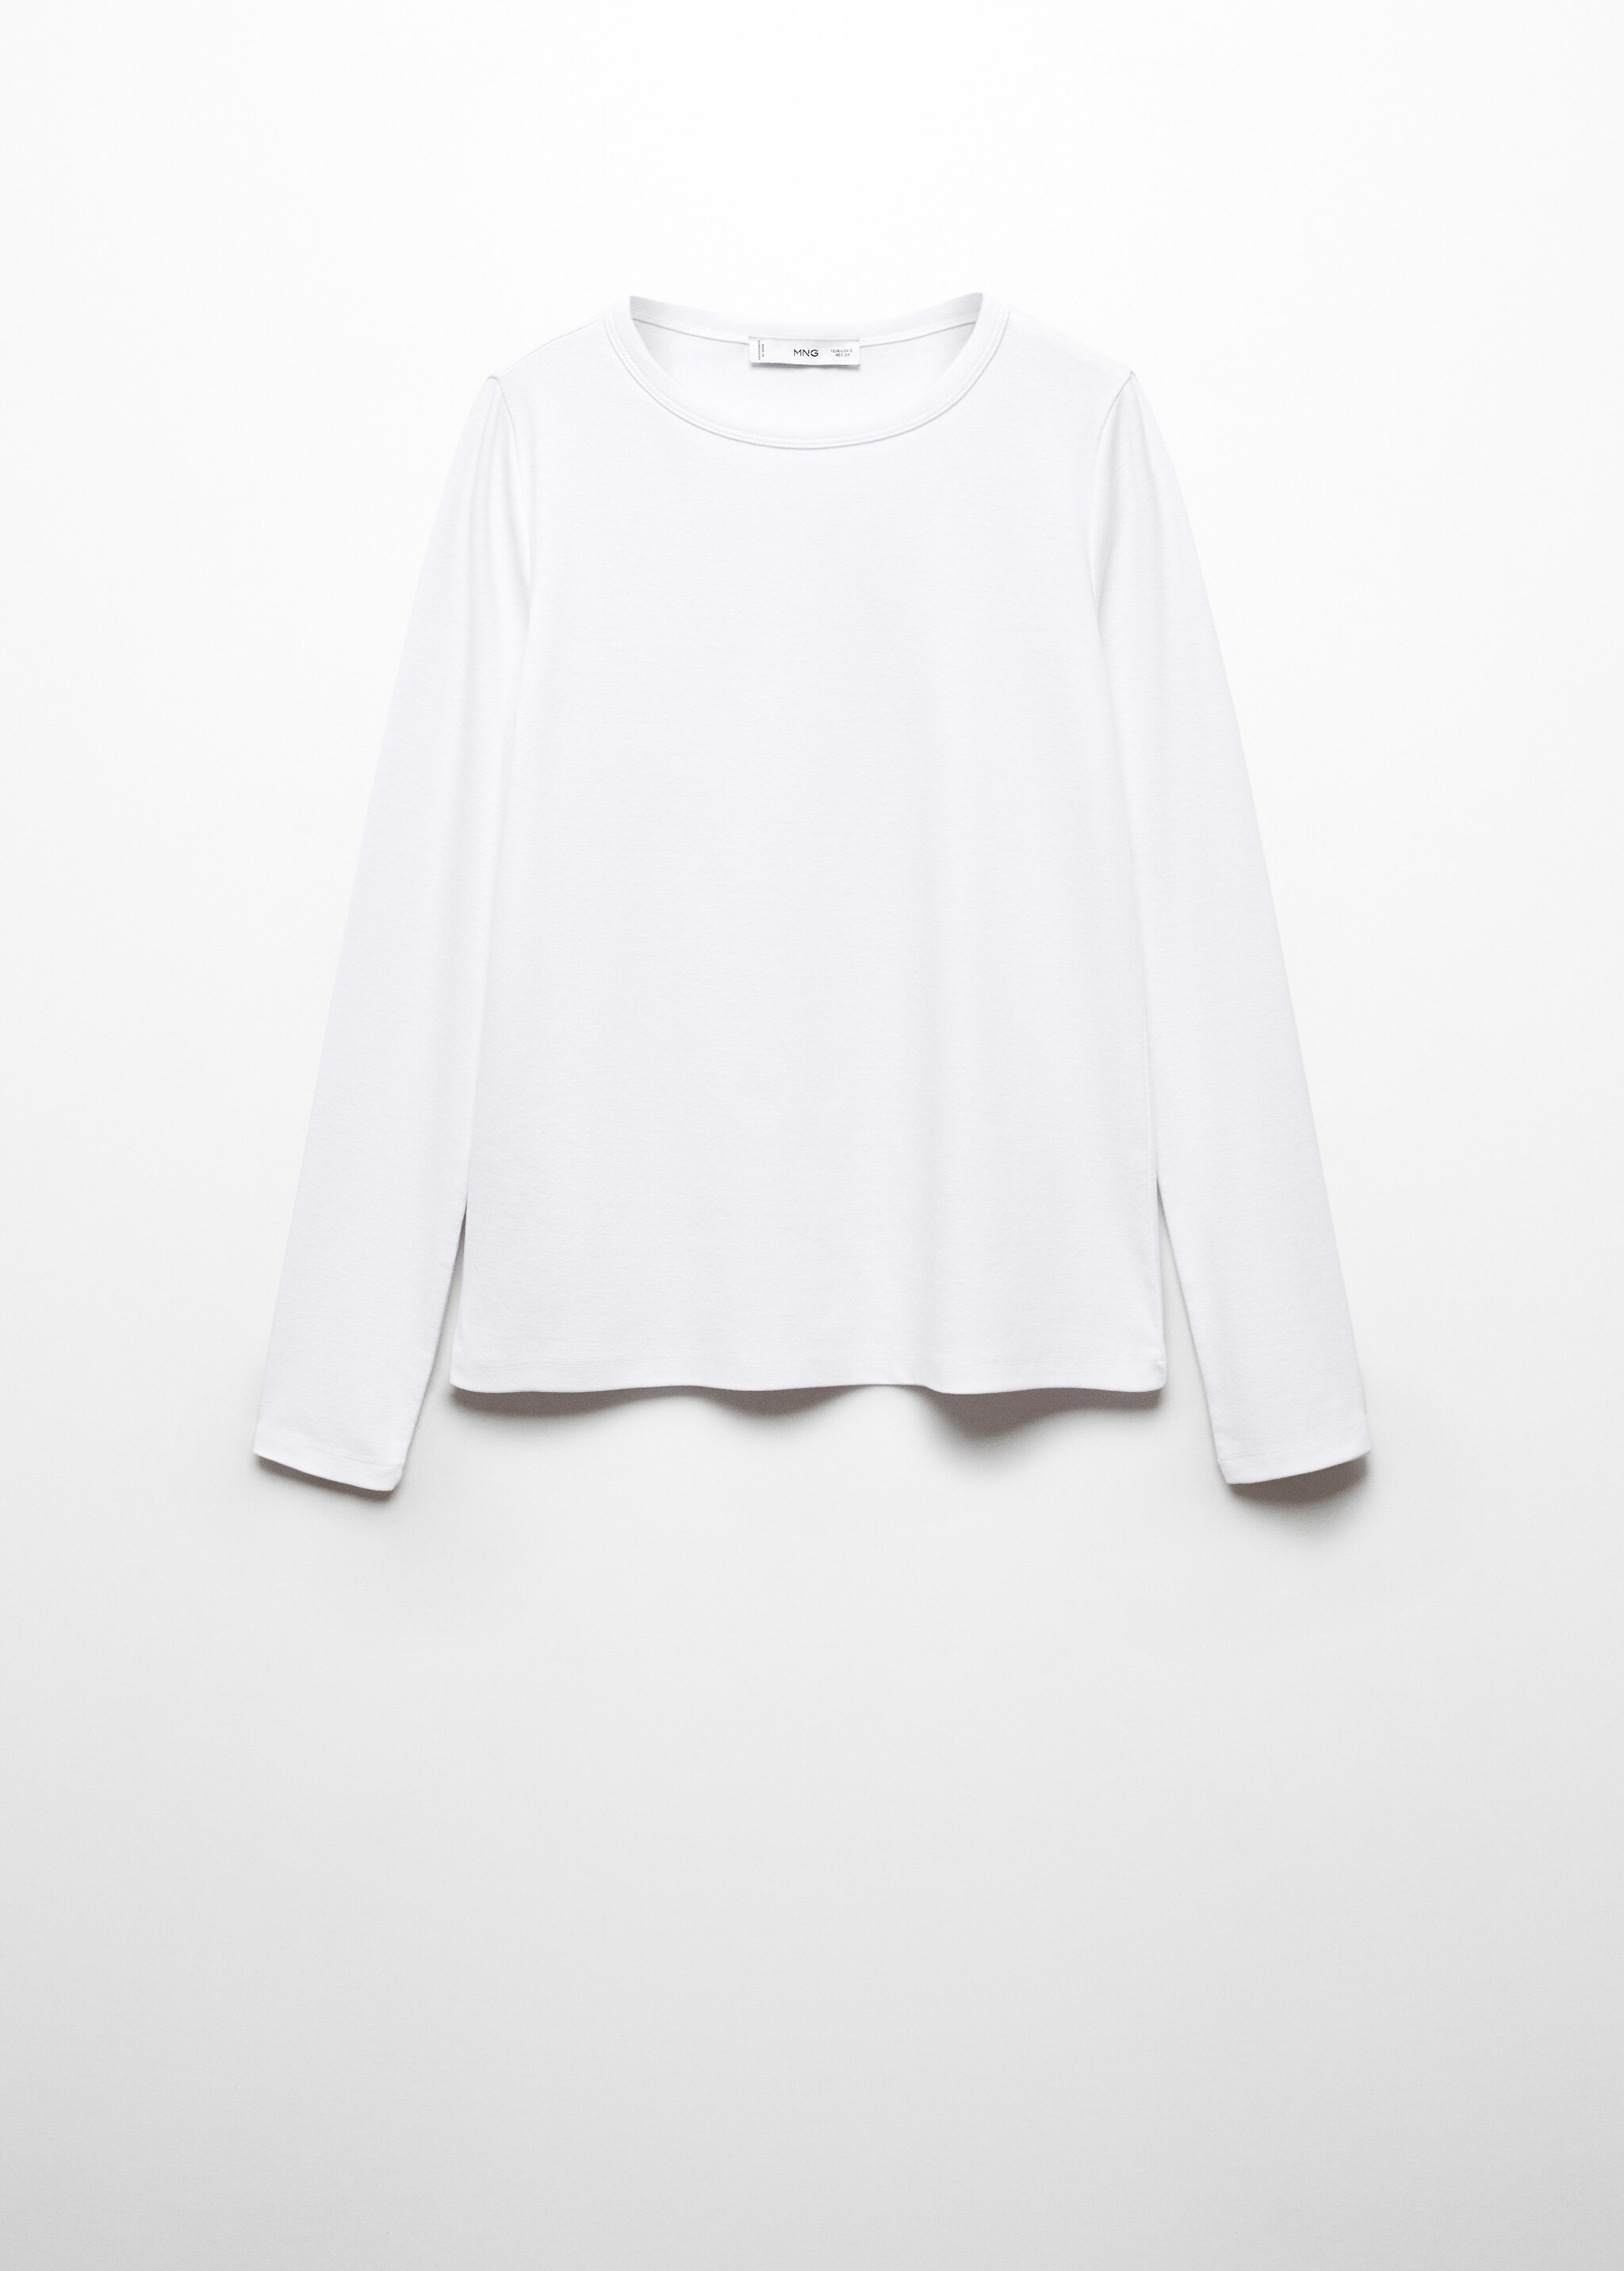 Long sleeve cotton t-shirt - Article without model